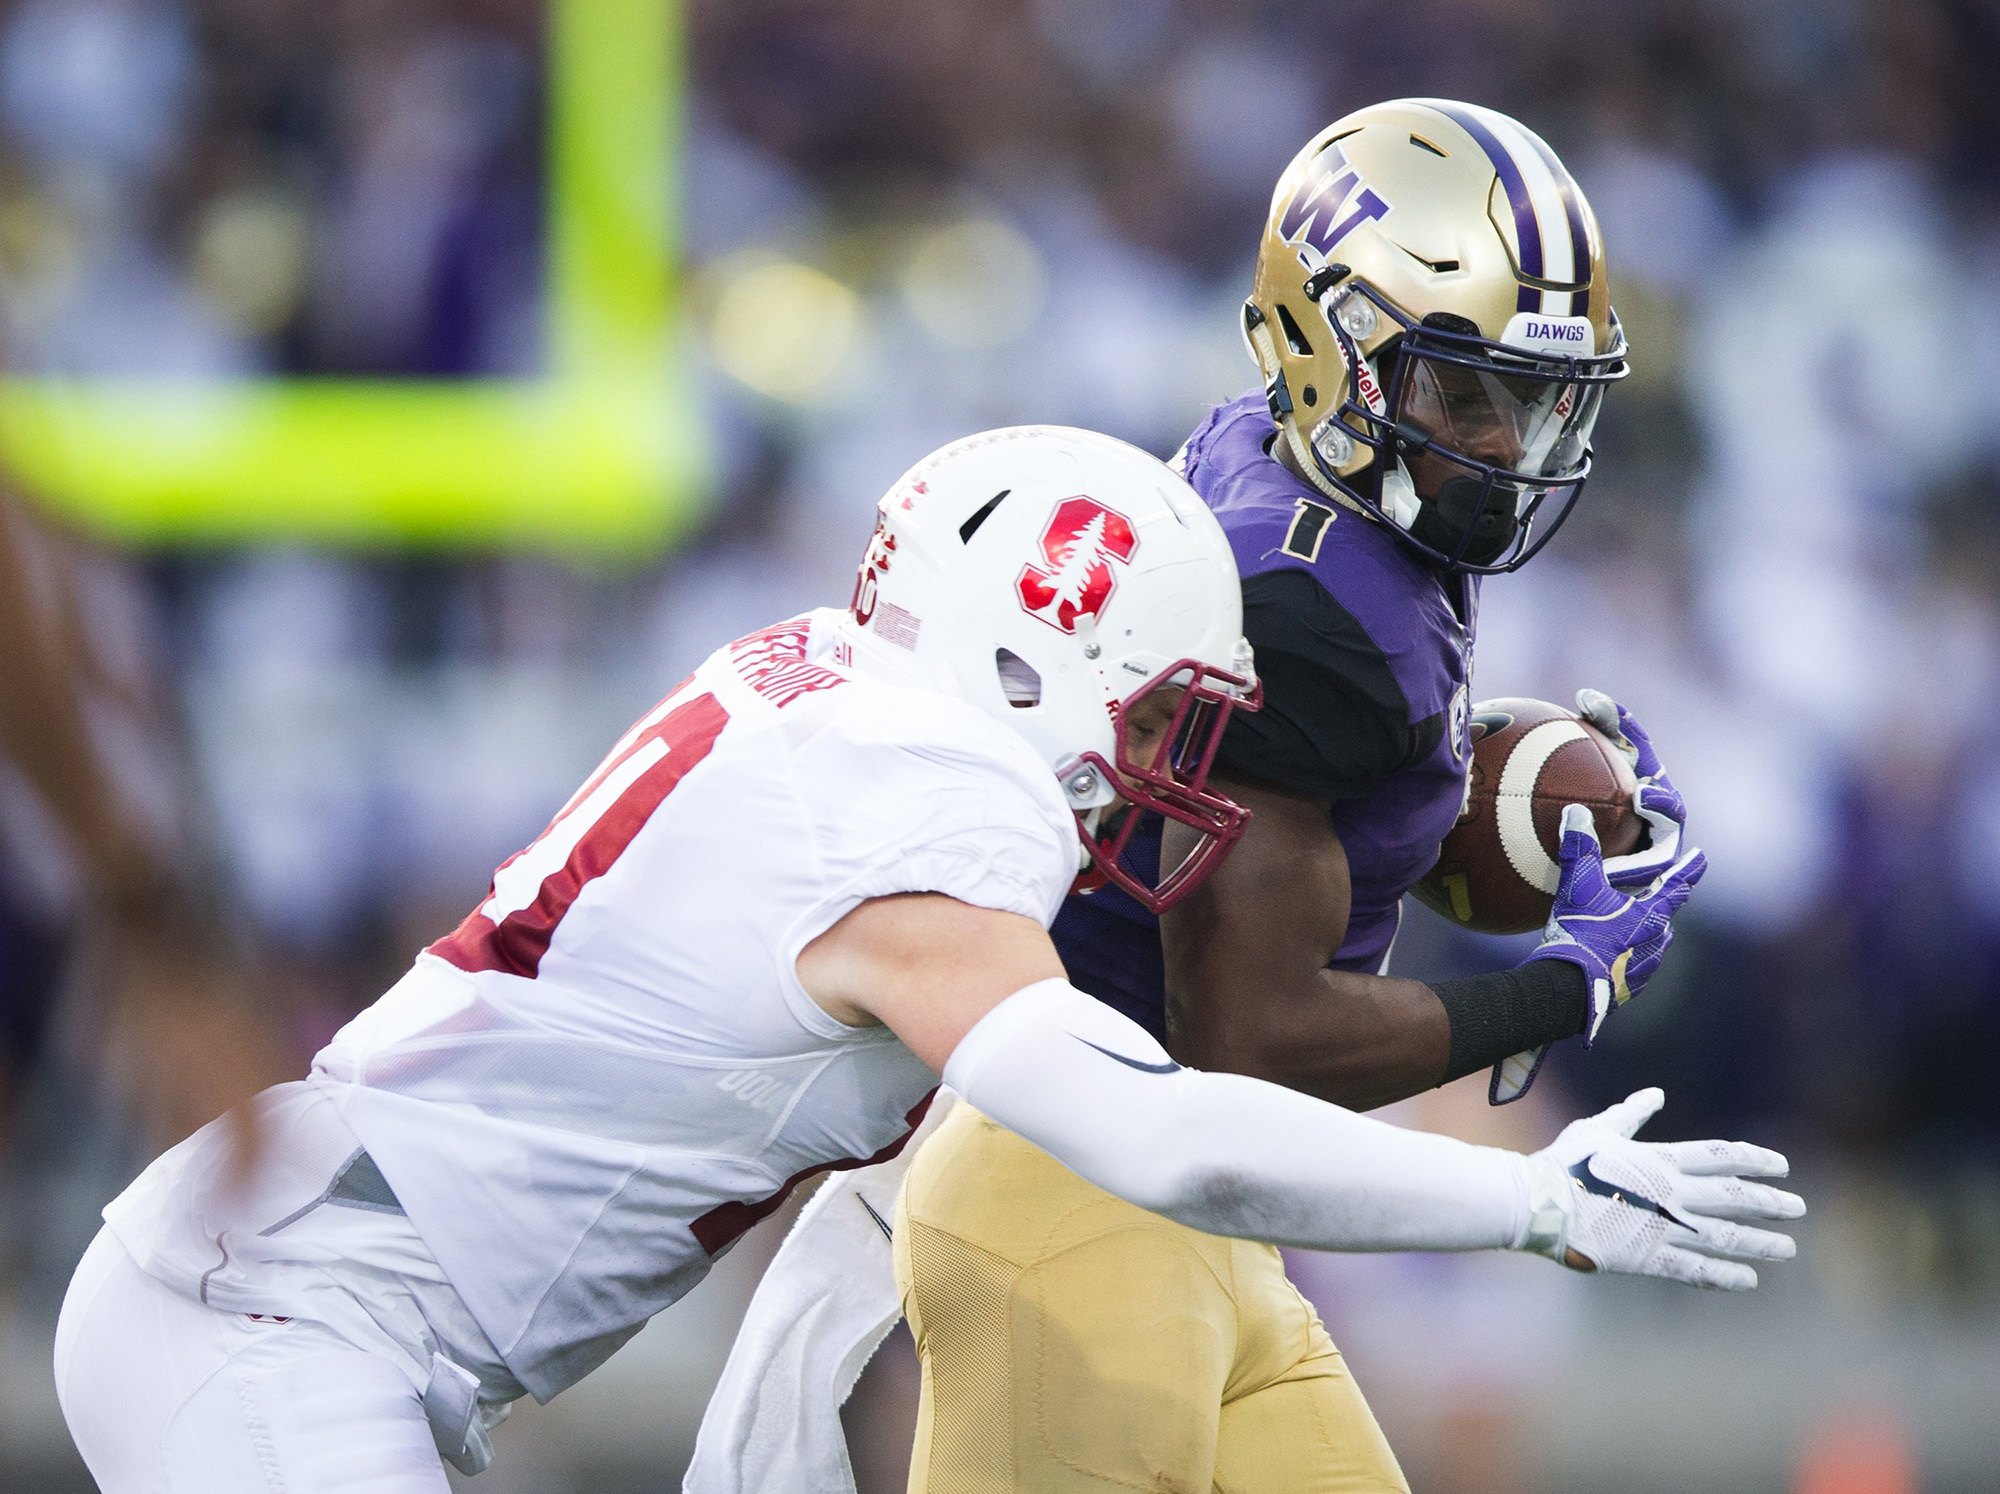 More than just fast, Huskies’ John Ross has developed into a talented receiver